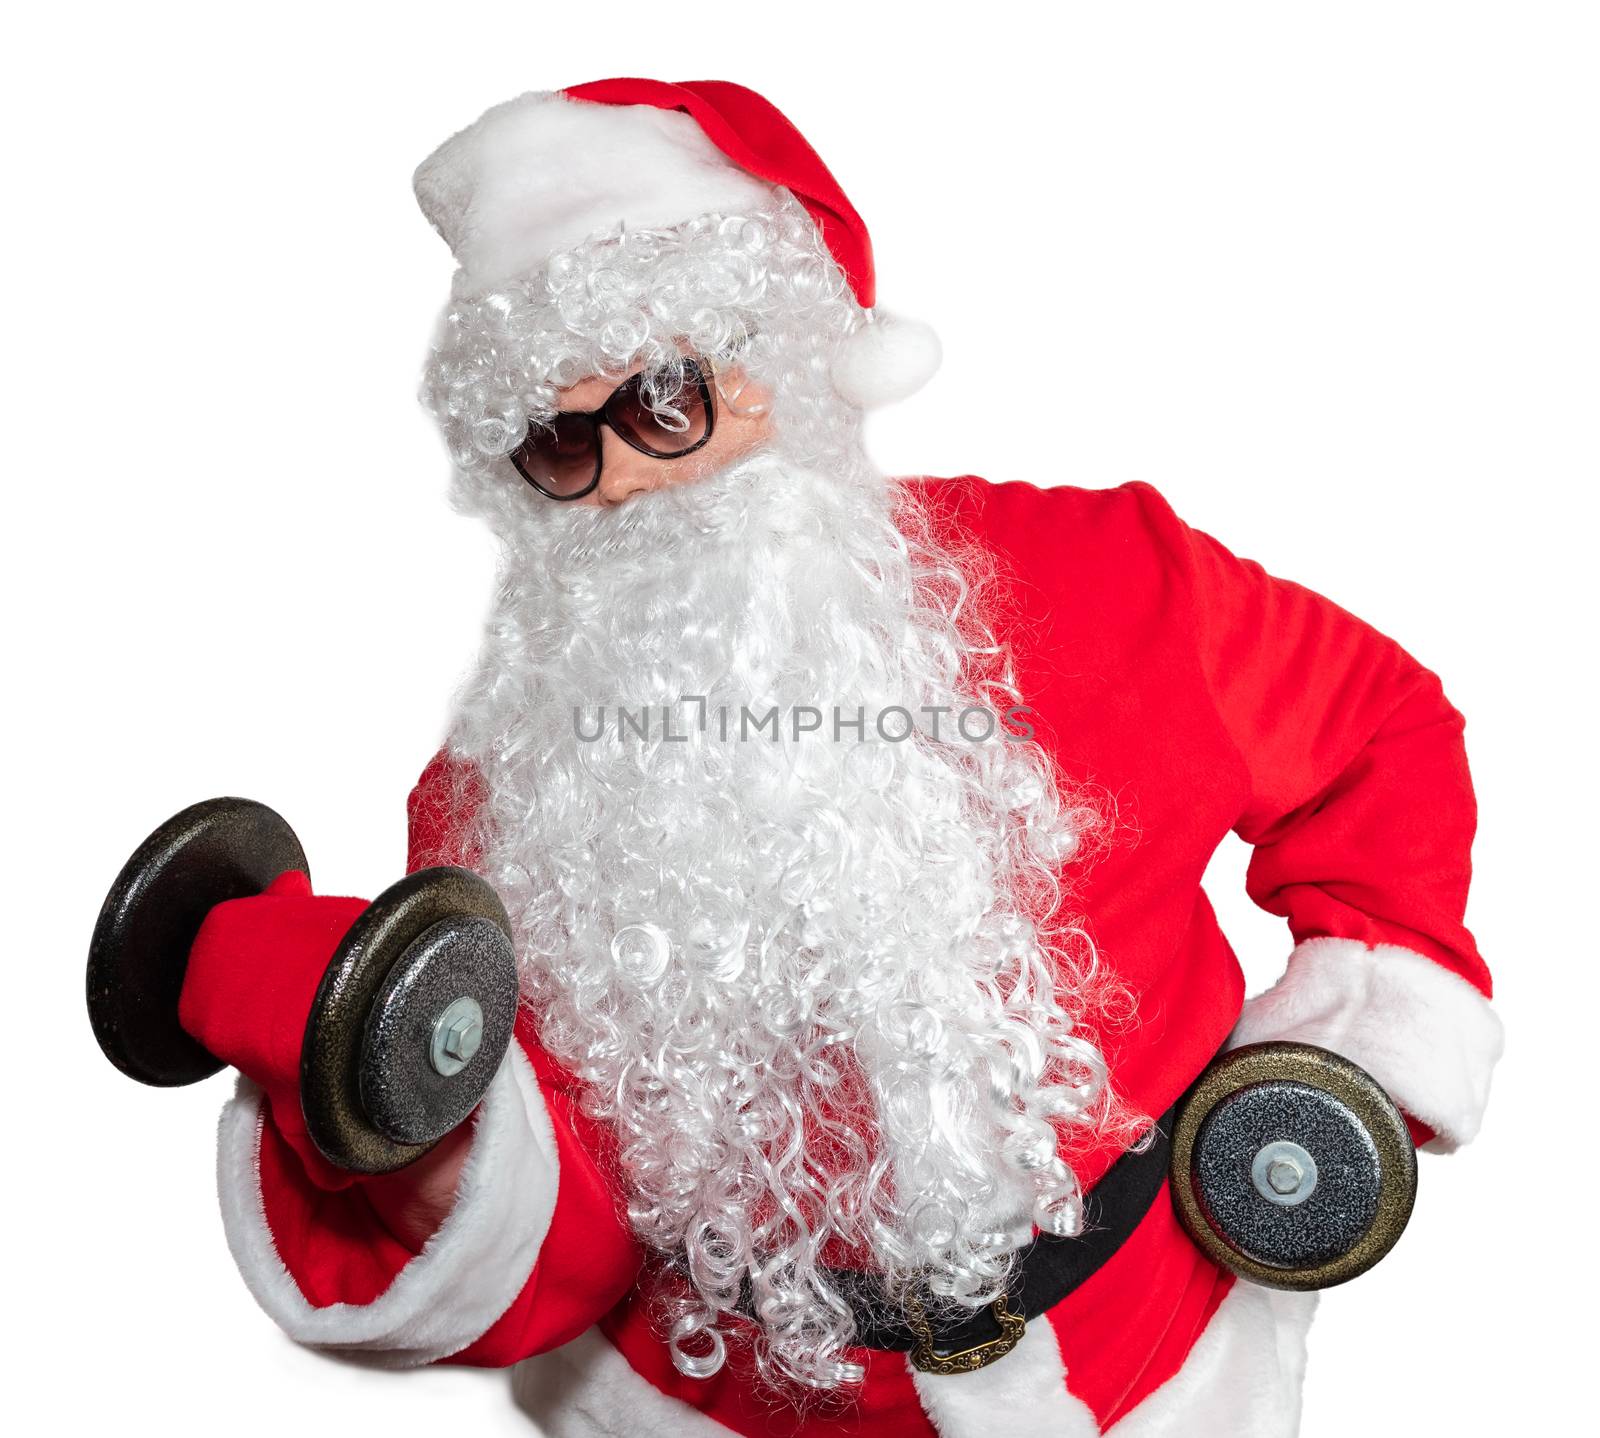 Santa Claus working out with two dumbbells and doing bicep curls. Santa wearing sunglasses and a long white beard. Isolated on white background.